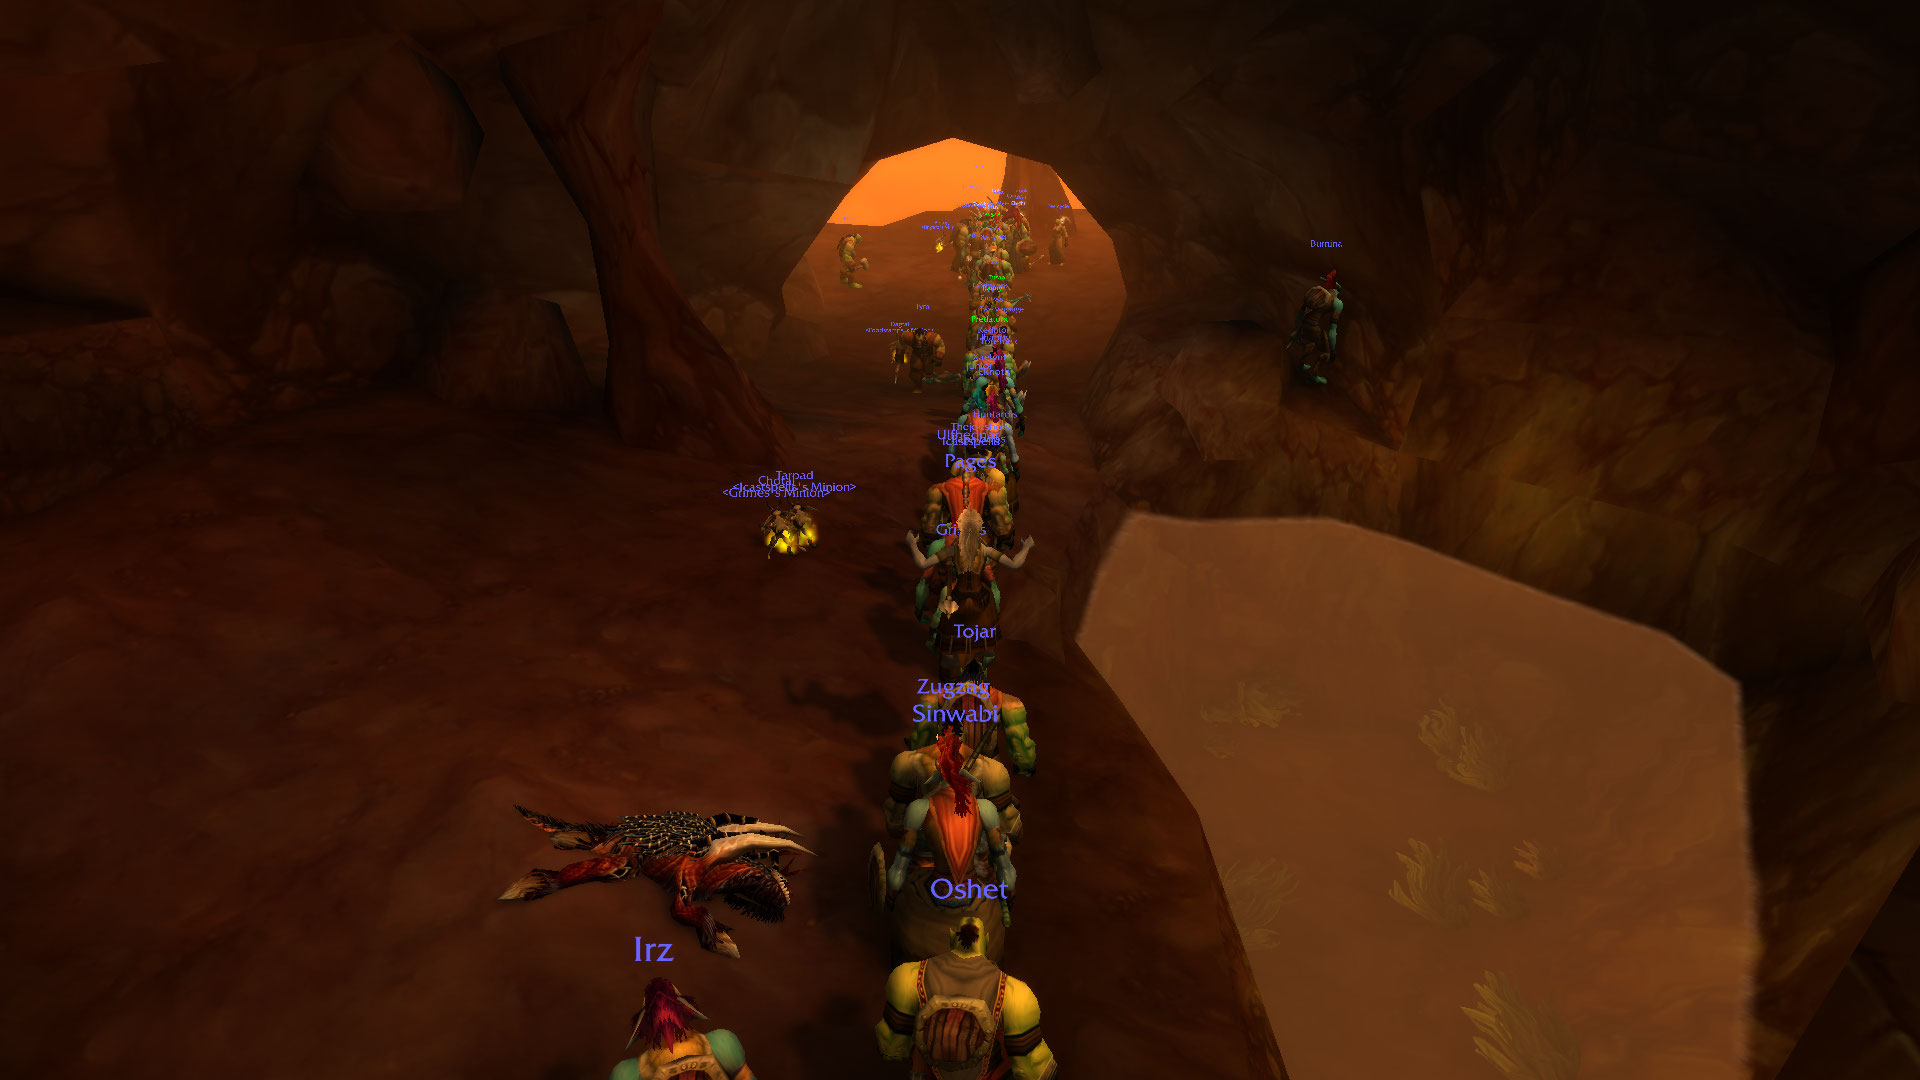 The Horde are such good people. Not like the dirty Alliance.